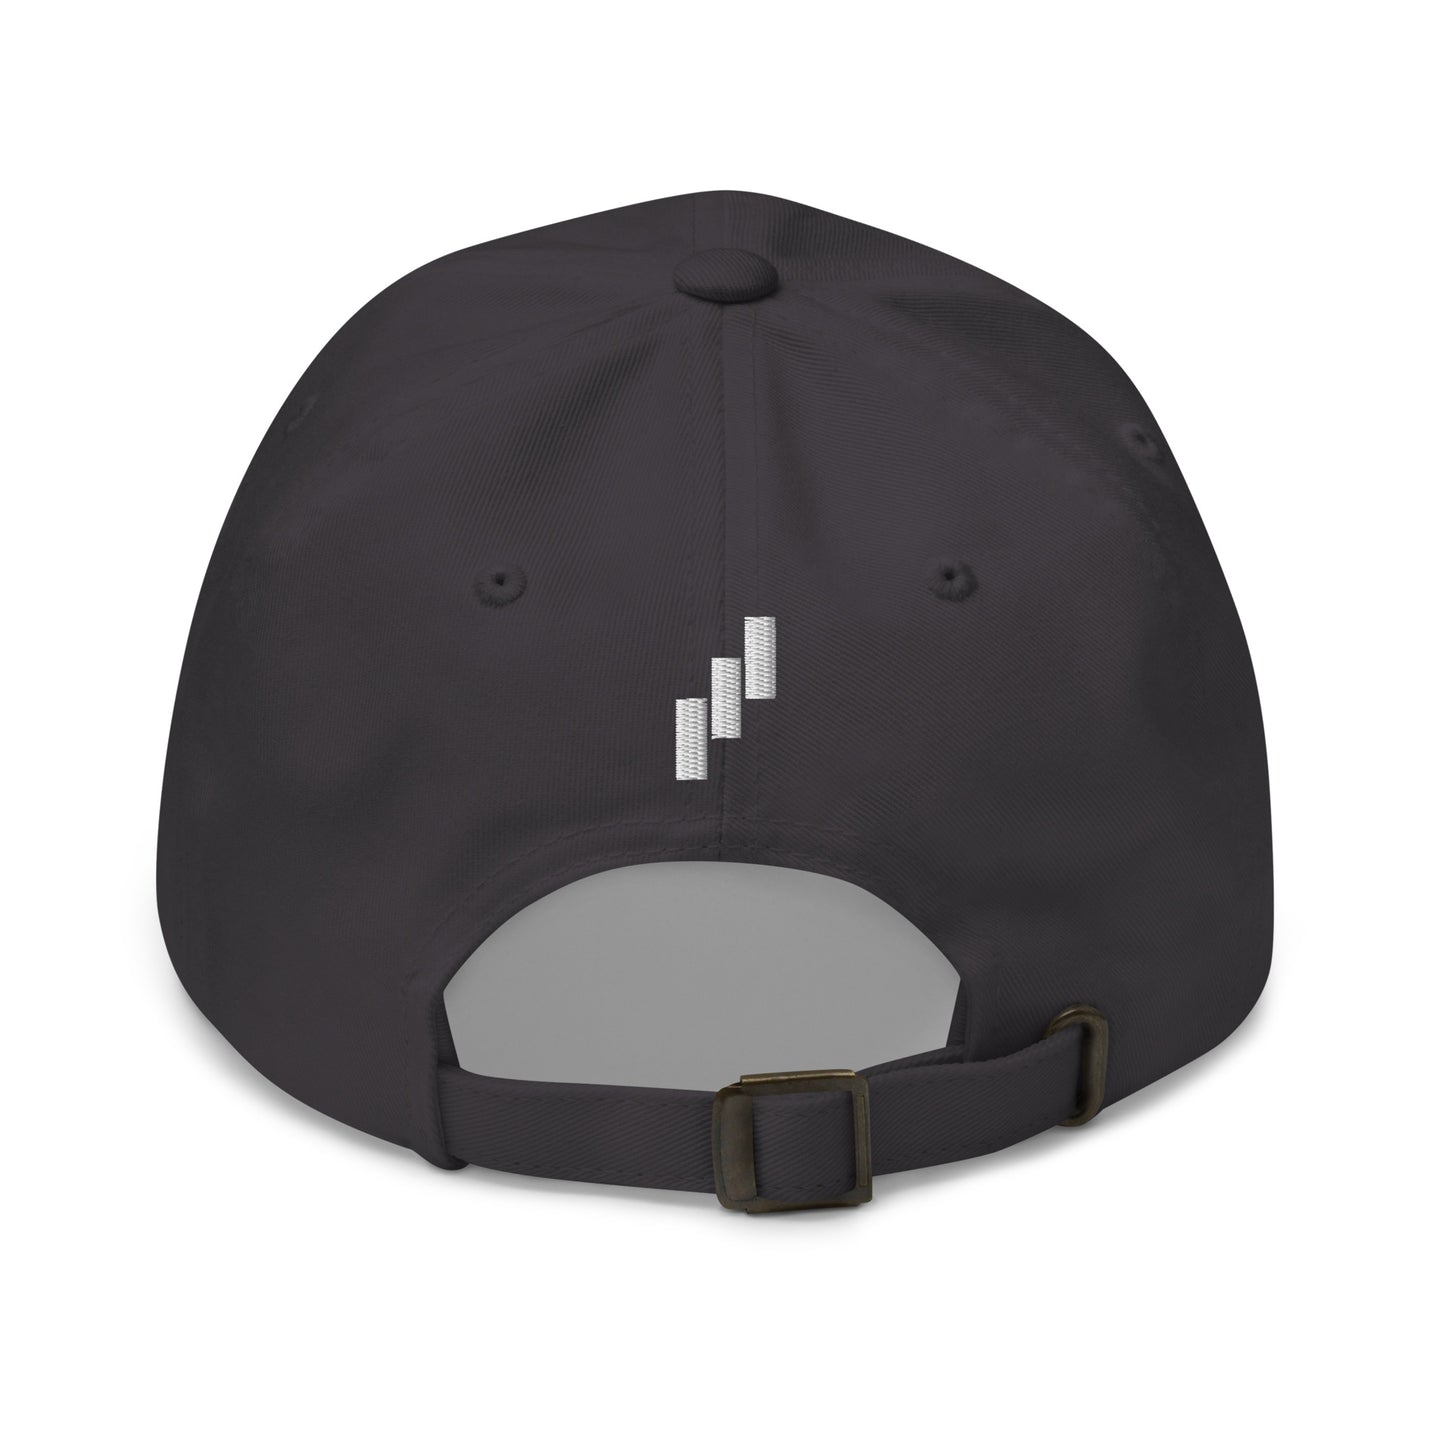 The North Trade Hat